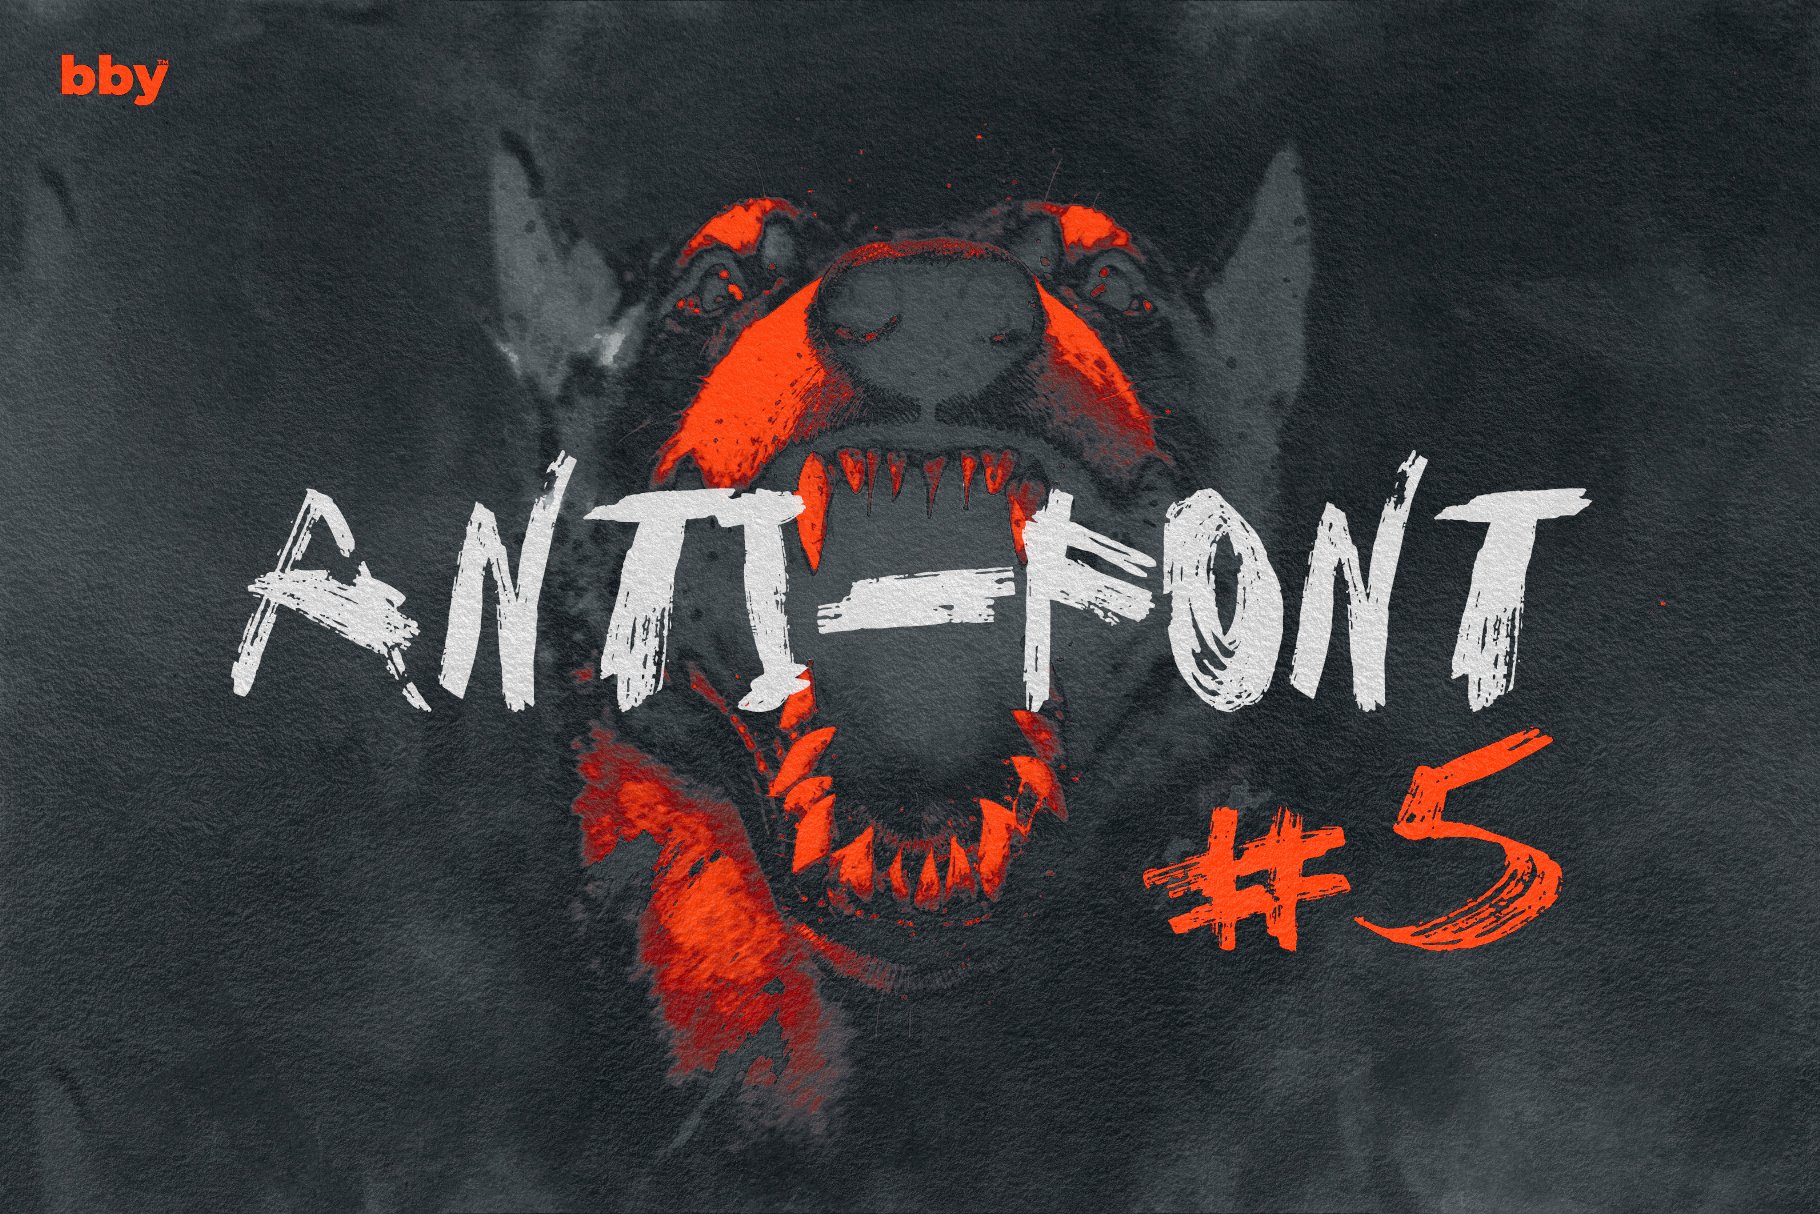 Anti-Font #5cover image.